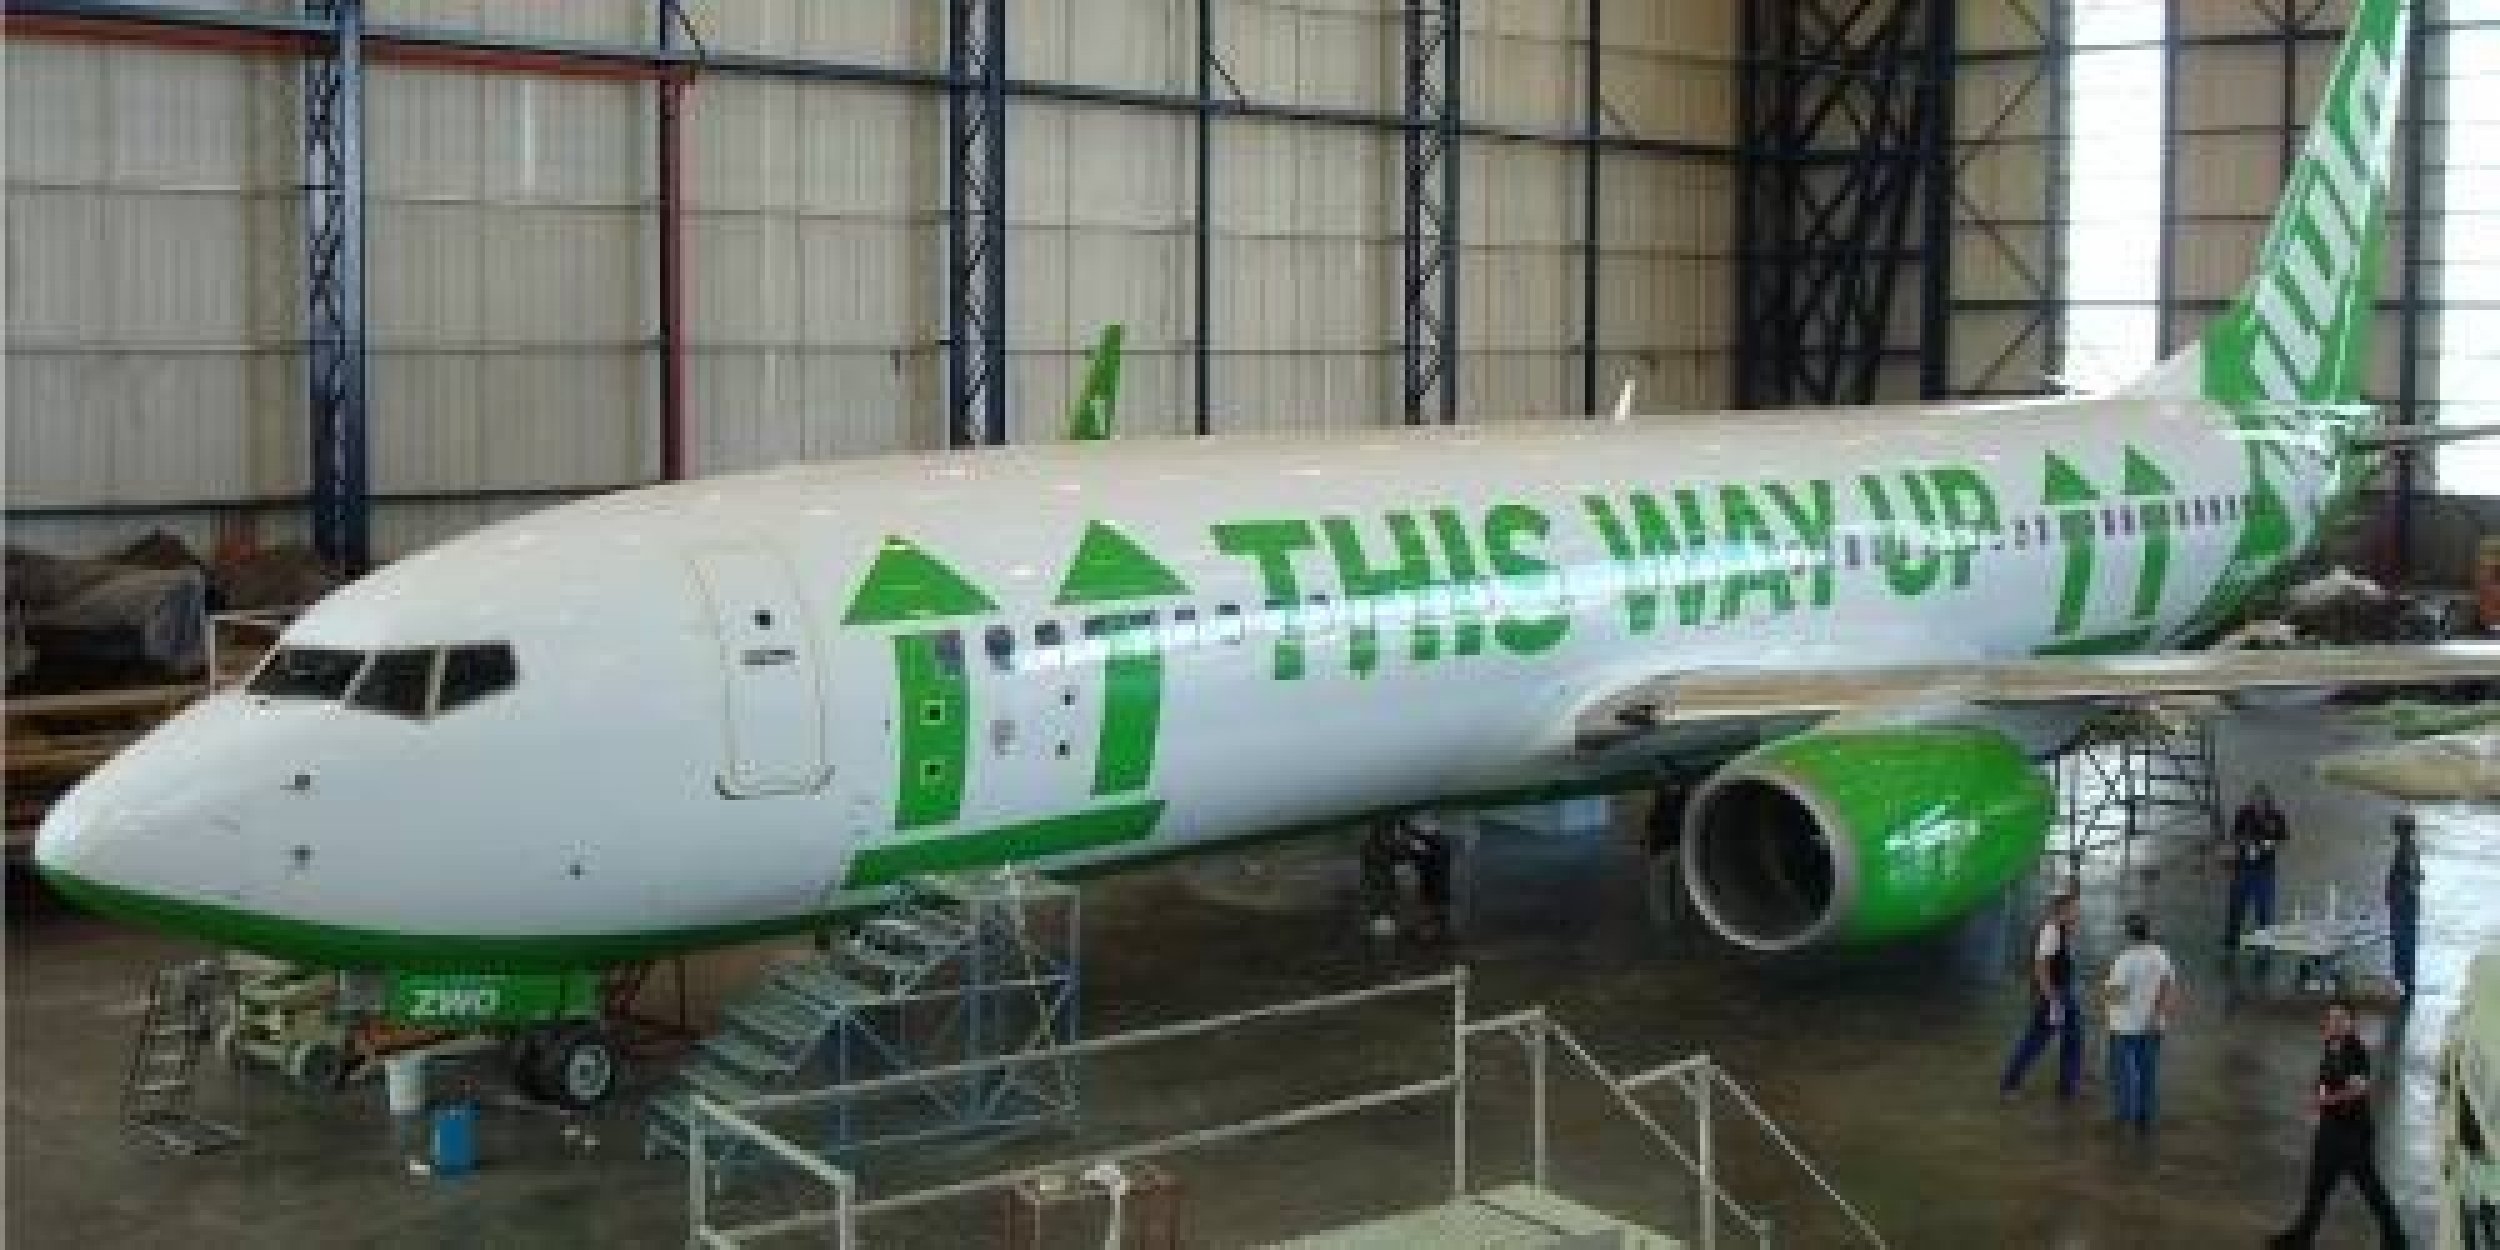 In case you didnt know the different parts of an airplane, Kulula Airlines has marked its own jet to tell you what everything is. On this particular model, Kulula uses humor to tell people which side of the plane should be up, which this slogan also doub